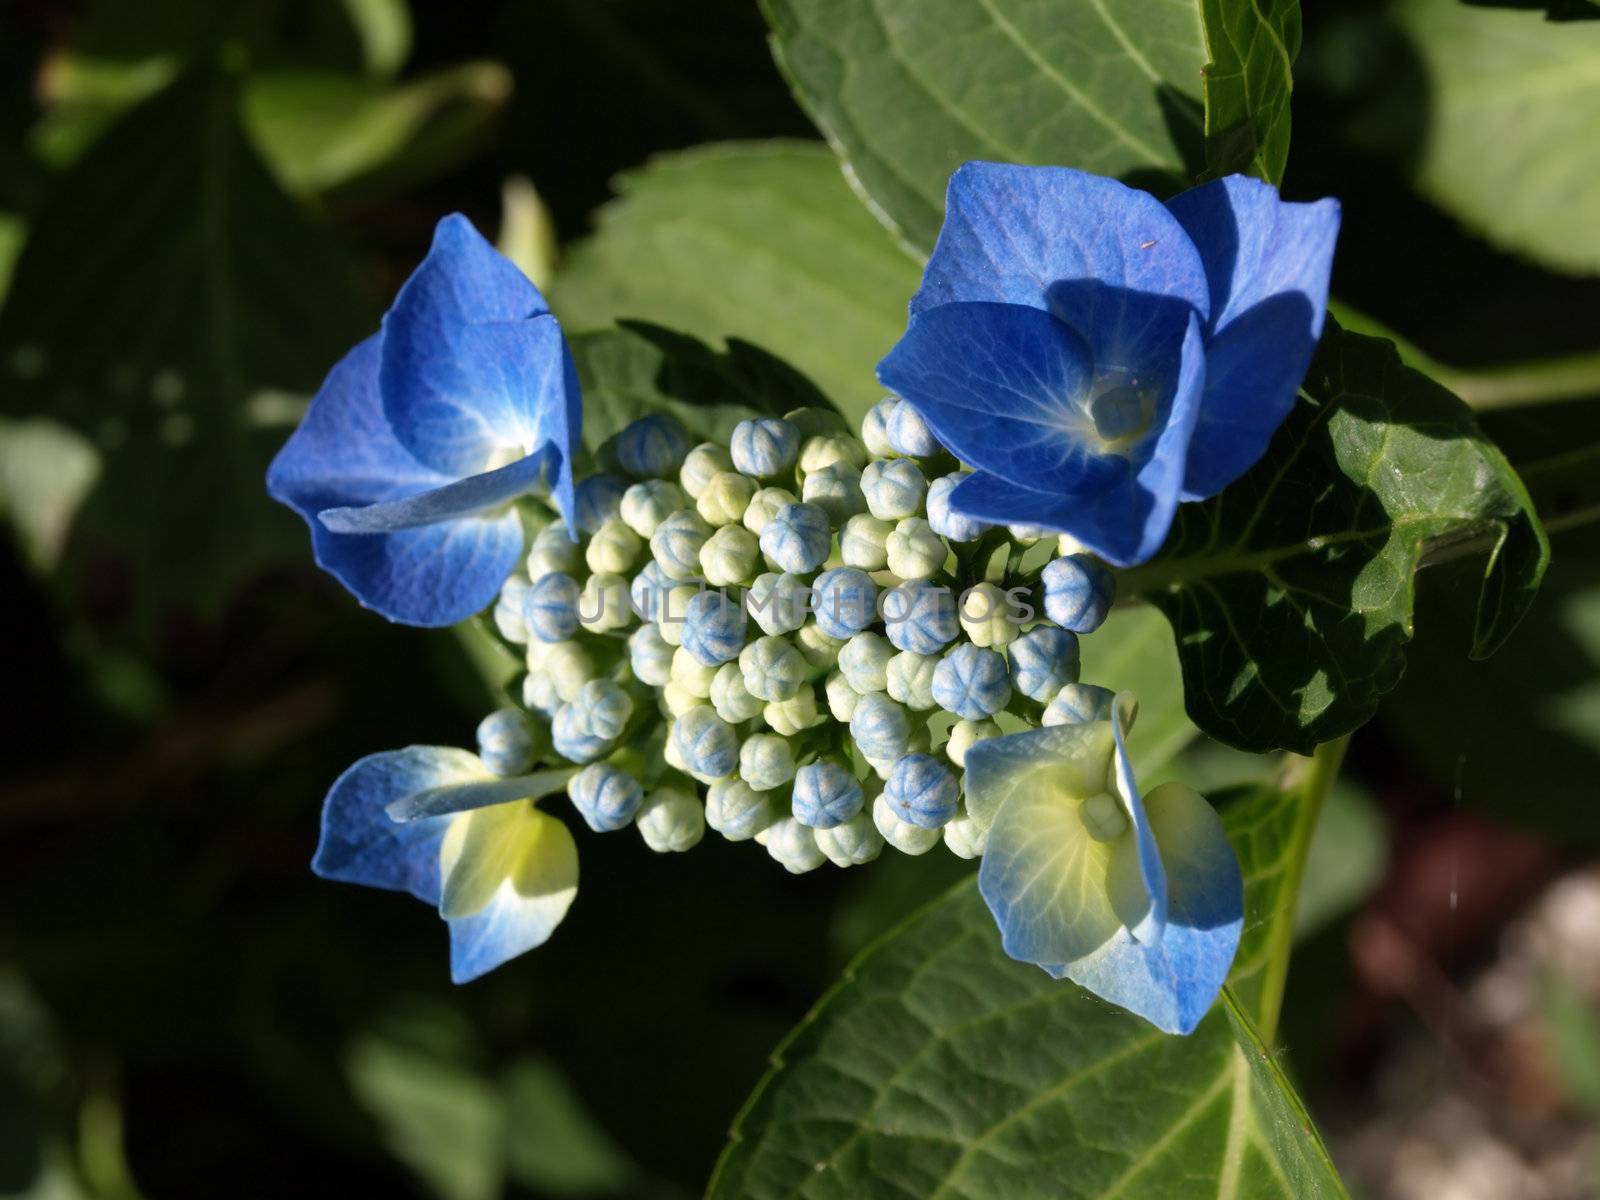 Four blue and white hydrangea flowers with green foliage